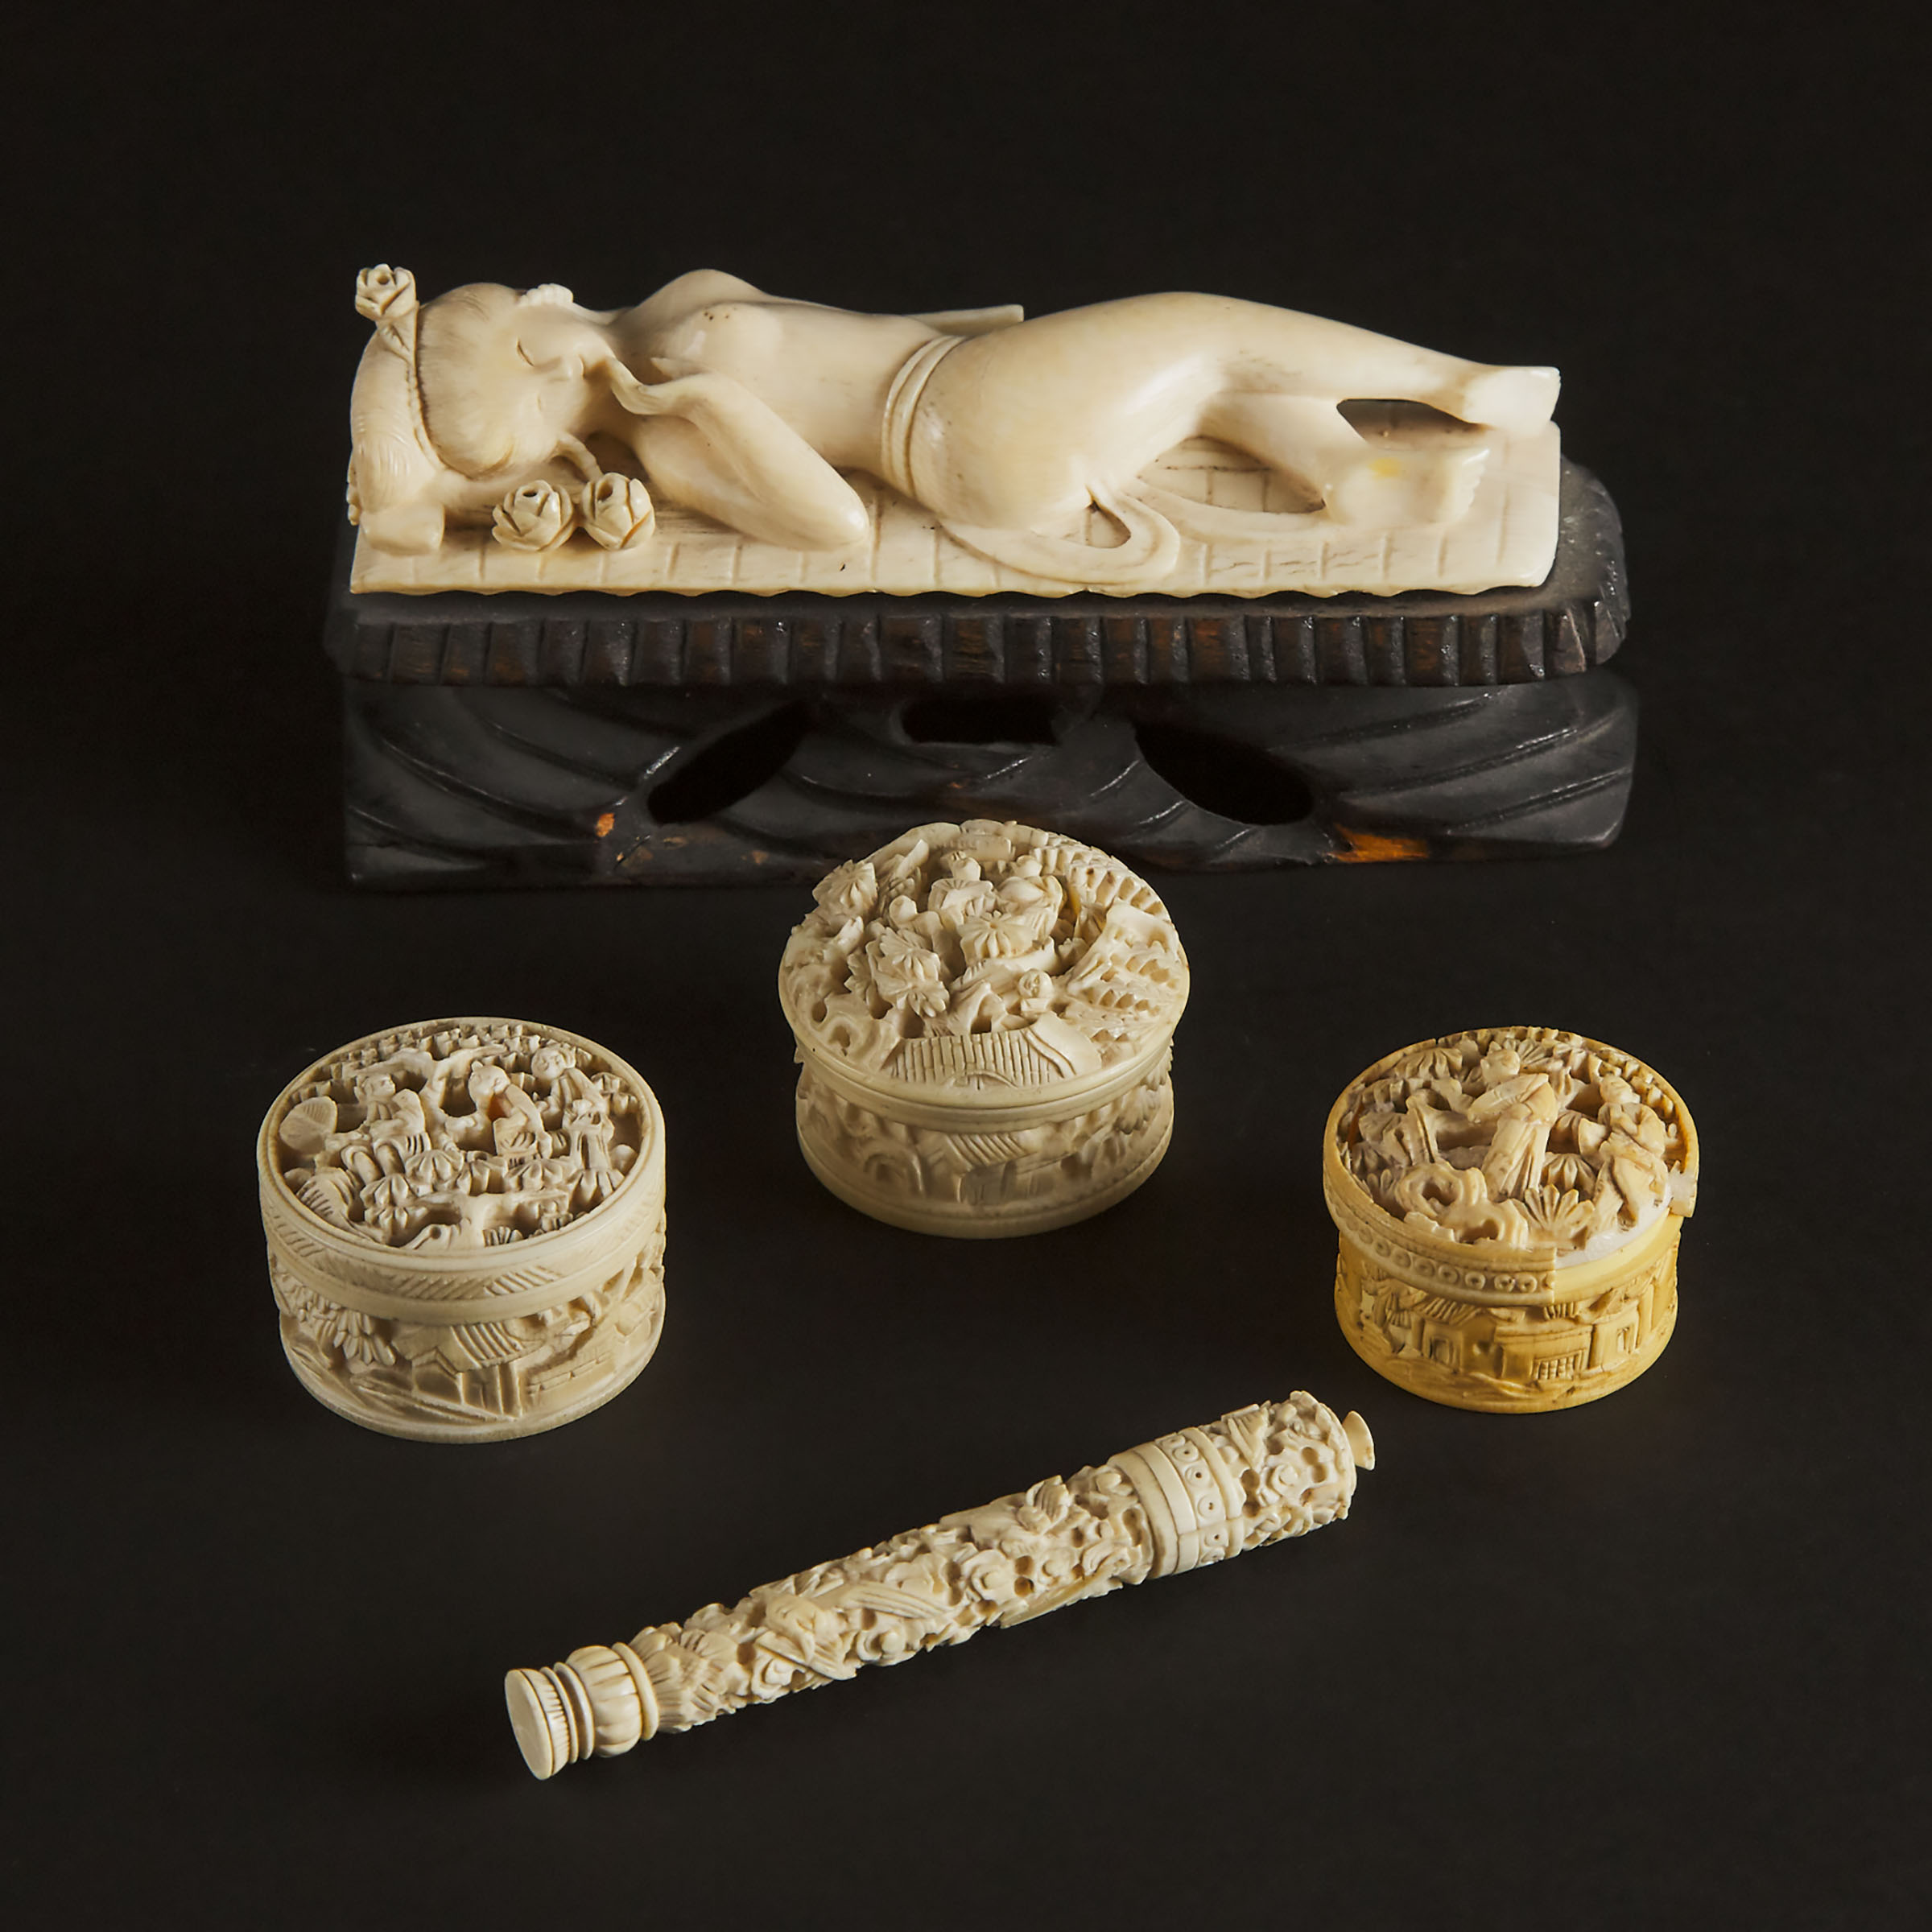 An Ivory 'Doctor's Doll' Figure, Together With Three Chinese Ivory Carved Circular Boxes, One Needle Case, and Six Mother-of-Pearl Game Counters, Circa 1900